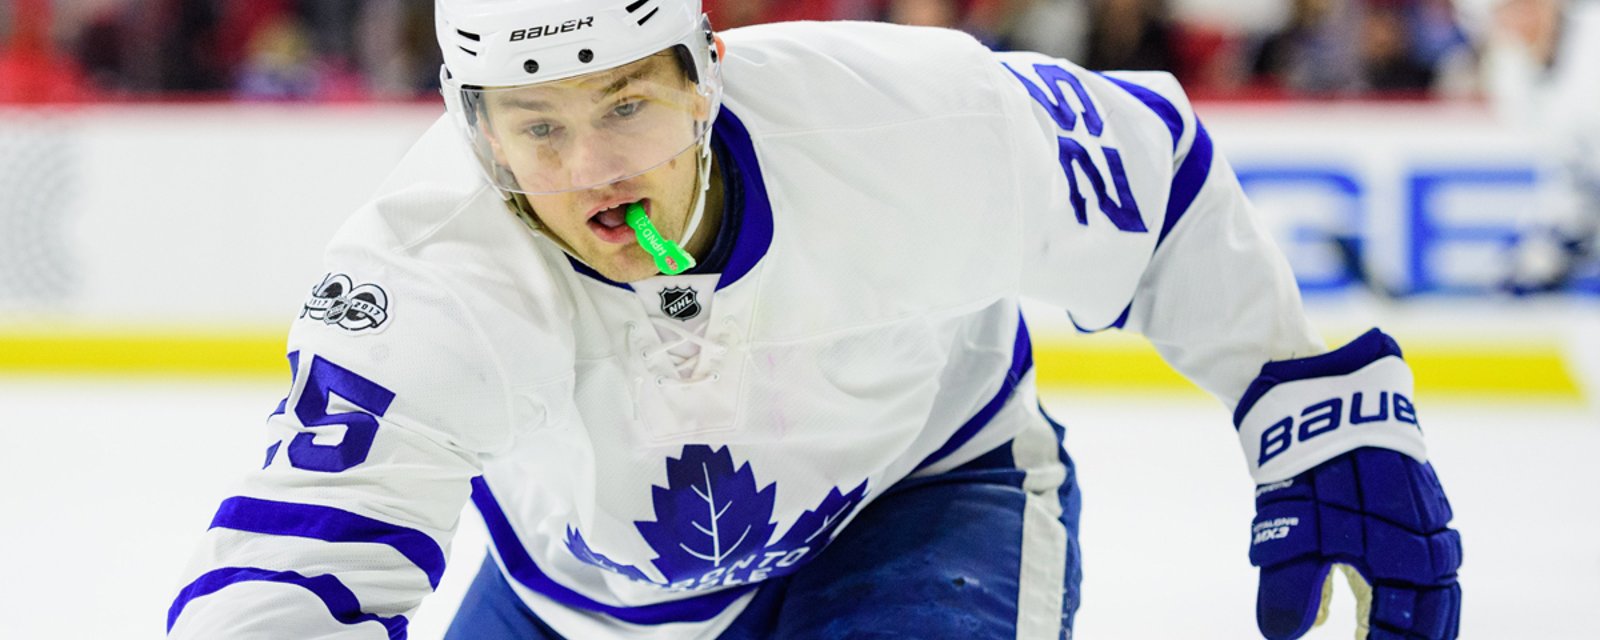 Your call: Should the Leafs sign or trade JvR?